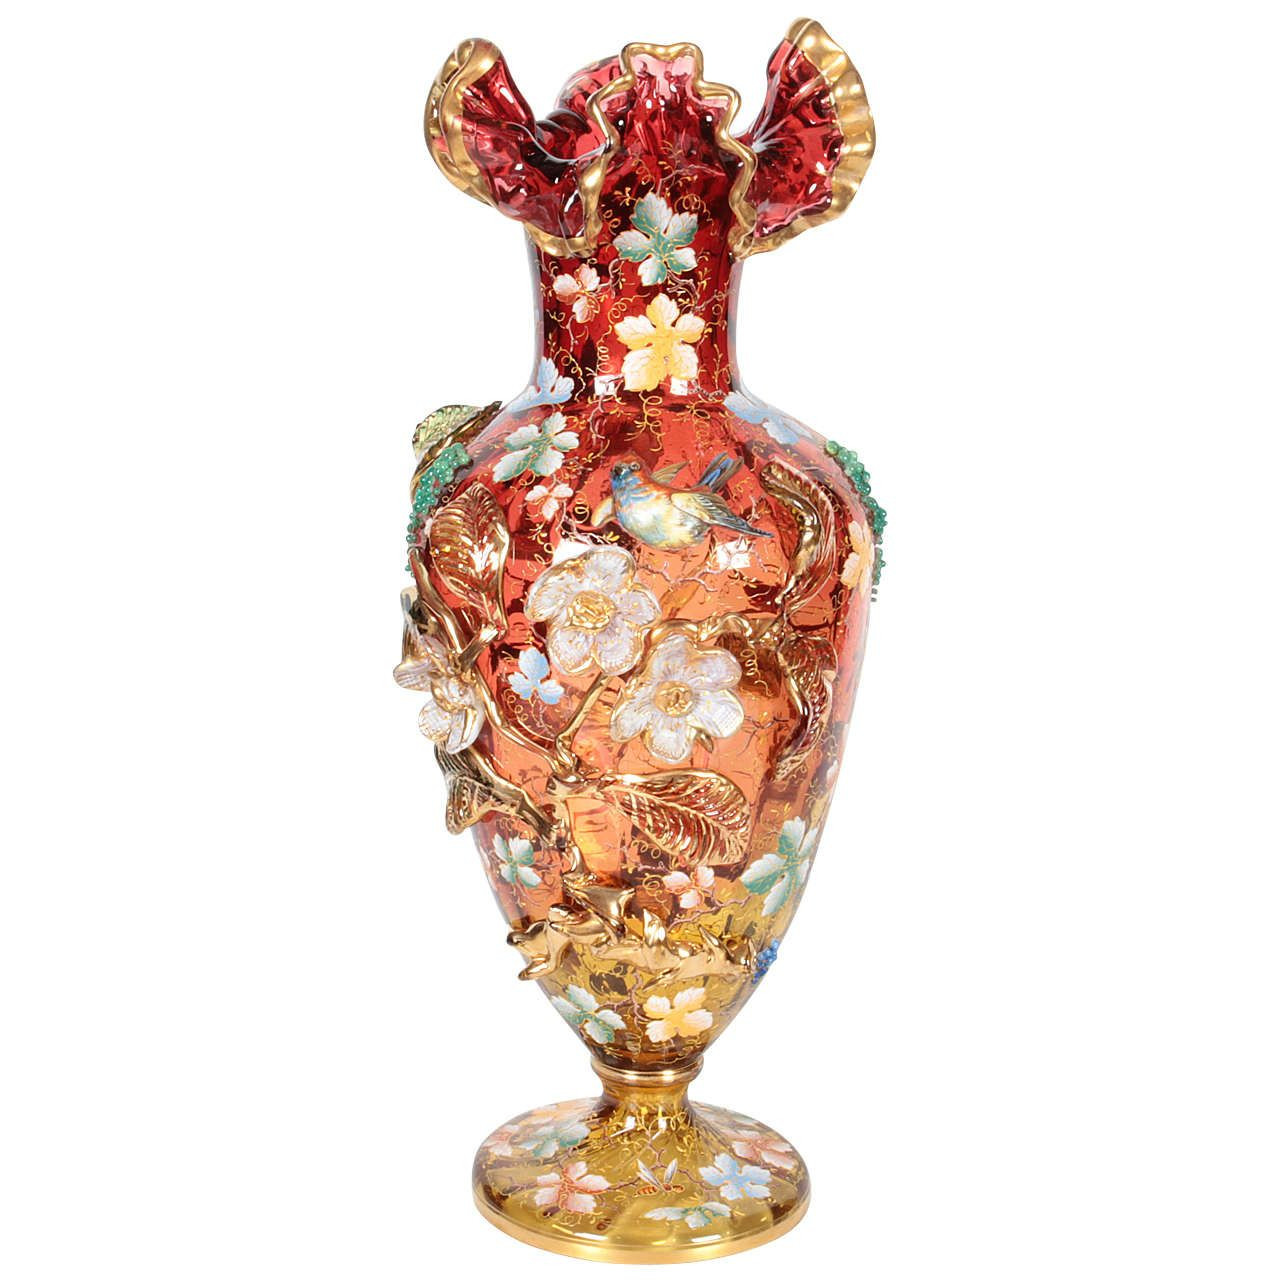 12 Stunning Antique Amber Glass Vase 2024 free download antique amber glass vase of moser glass amberina red vase with raised flowers leaves jewels within moser glass amberina red vase with raised flowers leaves jewels and bird from a unique coll